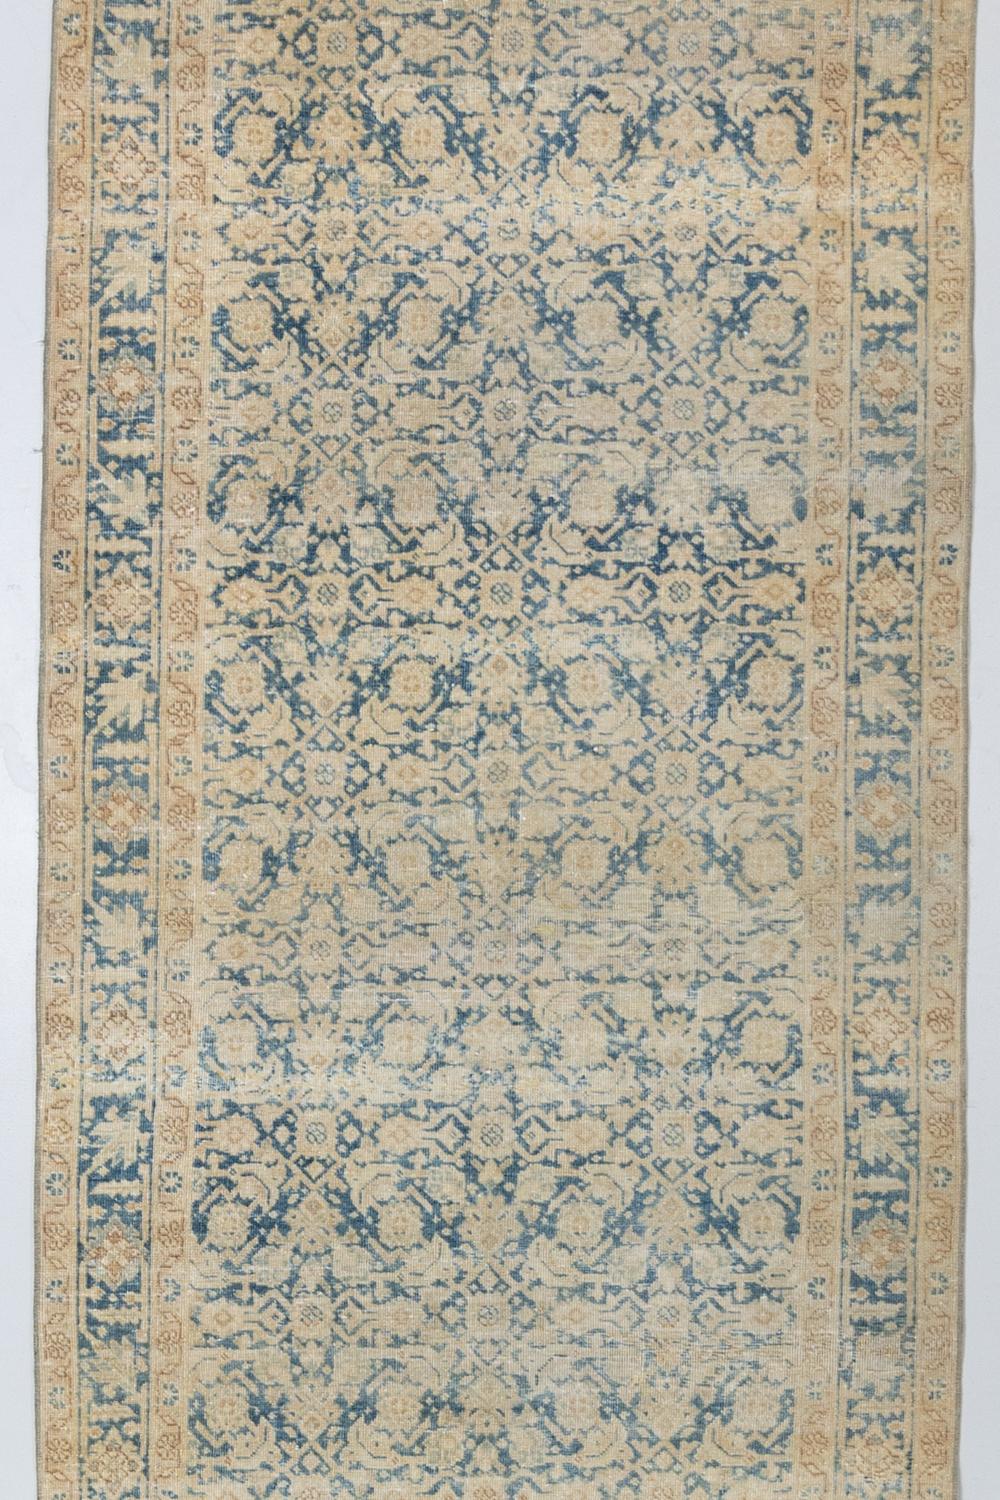 Pile: Low

Material: wool on cotton

Wear Notes: 3

Wear Guide:
Vintage and antique rugs are by nature, pre-loved and may show evidence of their past. There are varying degrees of wear to vintage rugs; some show very little and some show a